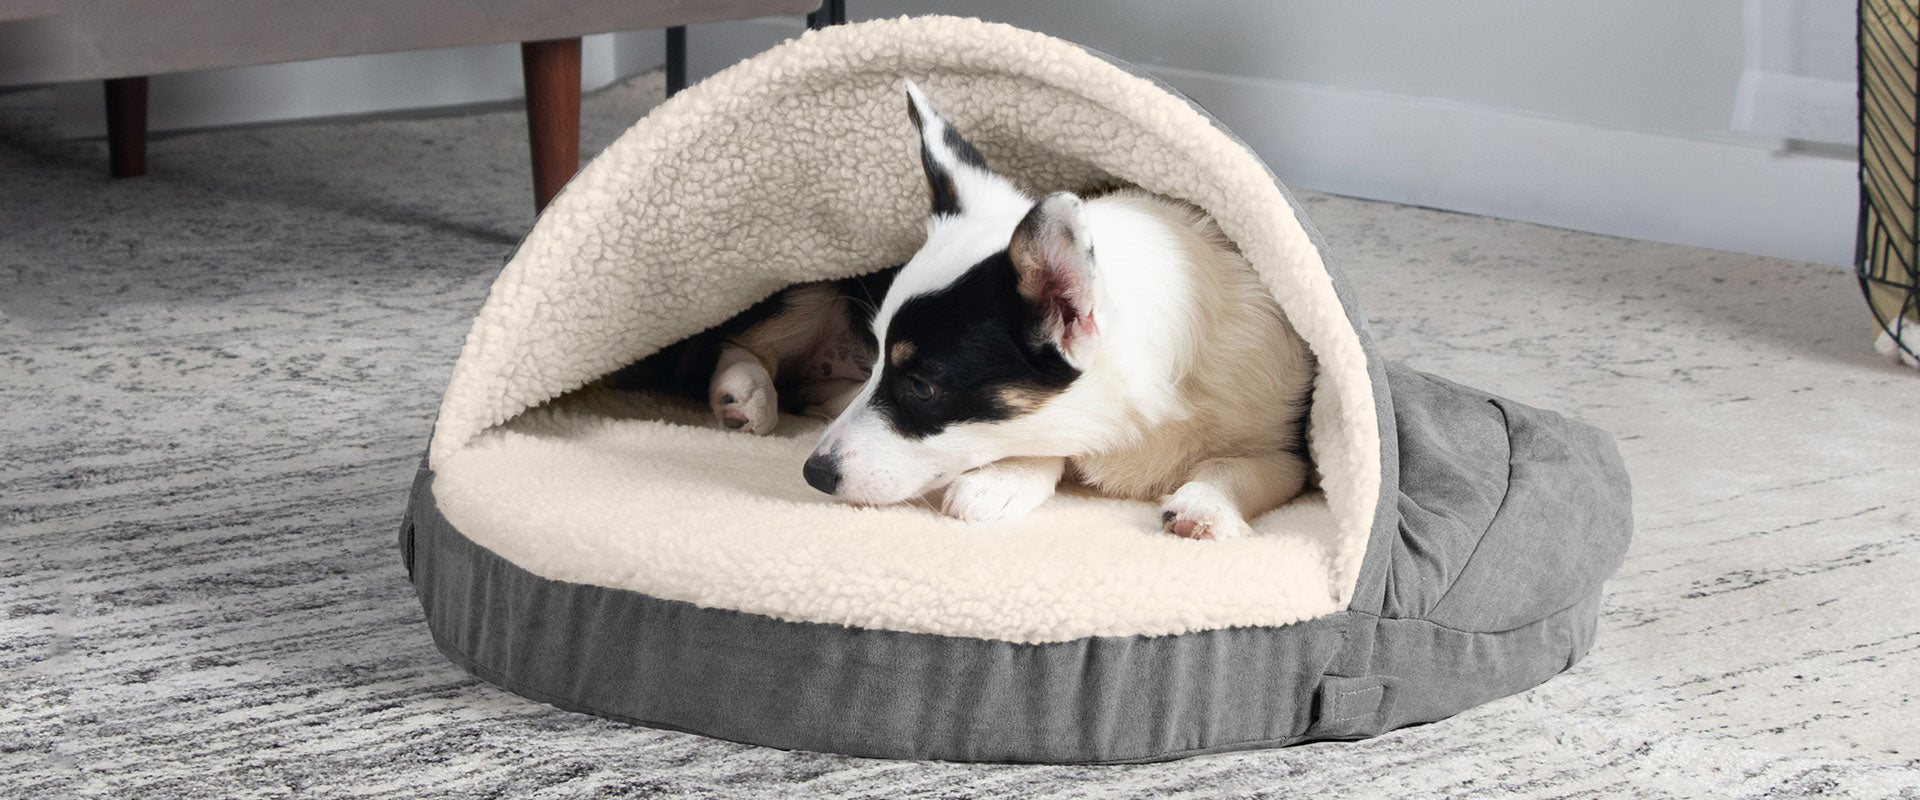 A black and white dog in a snuggery burrow dog bed that is white and grey at FurHaven Pet Products.